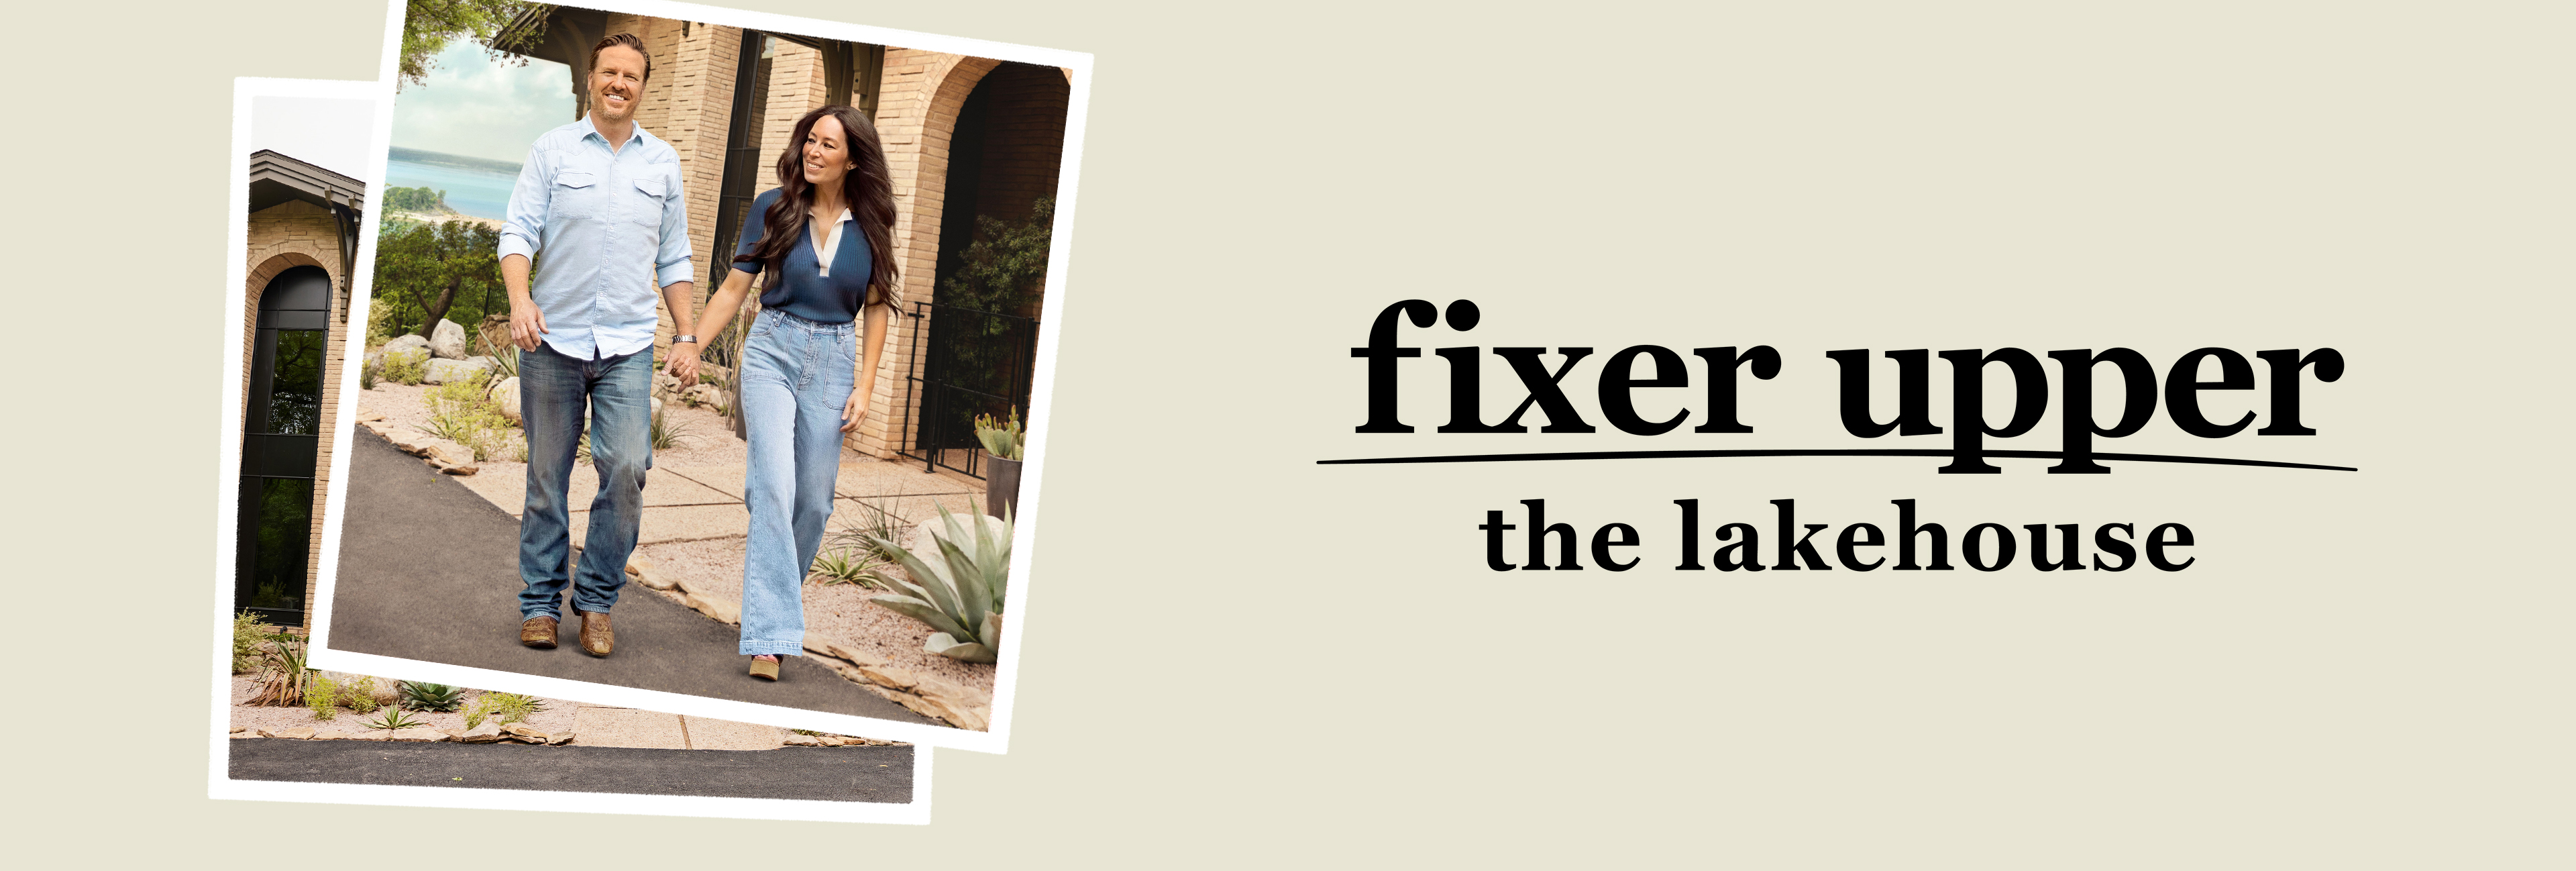 FIXER UPPER: The Lakehouse